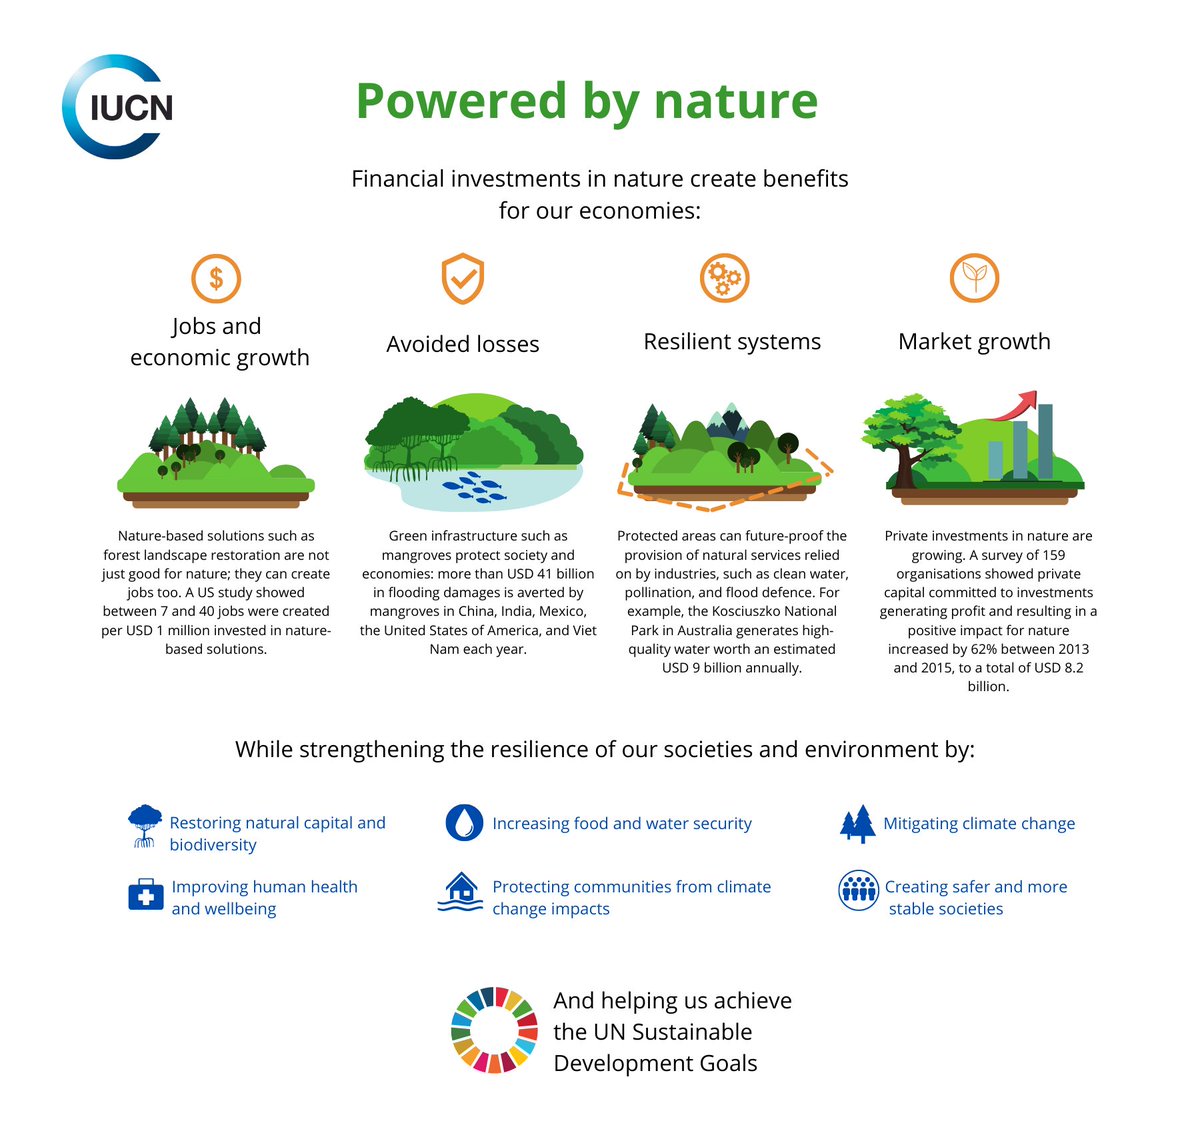 Nature underpins the majority of global #GDP through the services it provides to people, such as clean air, food, and water. So, investing in #nature makes economic sense.